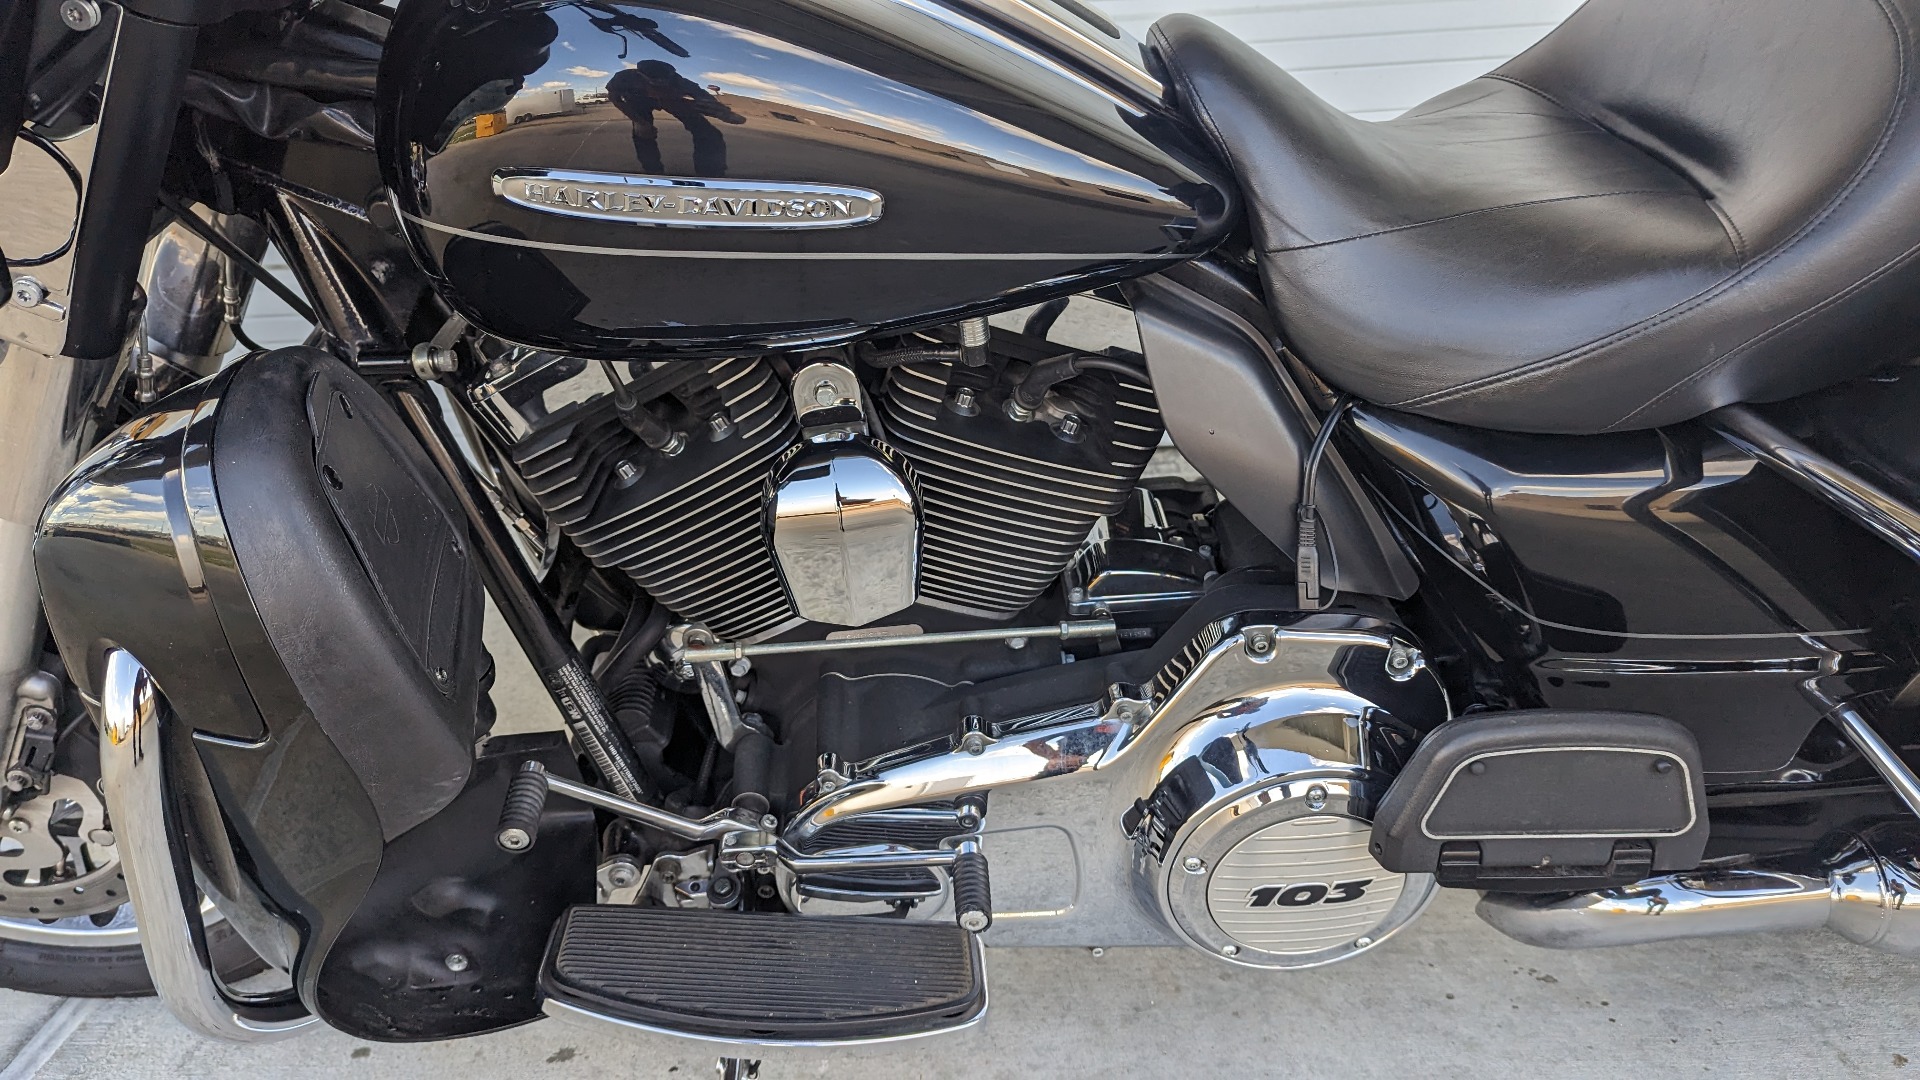 2013 Harley-Davidson Electra Glide Ultra Limited for sale in monroe - Photo 7